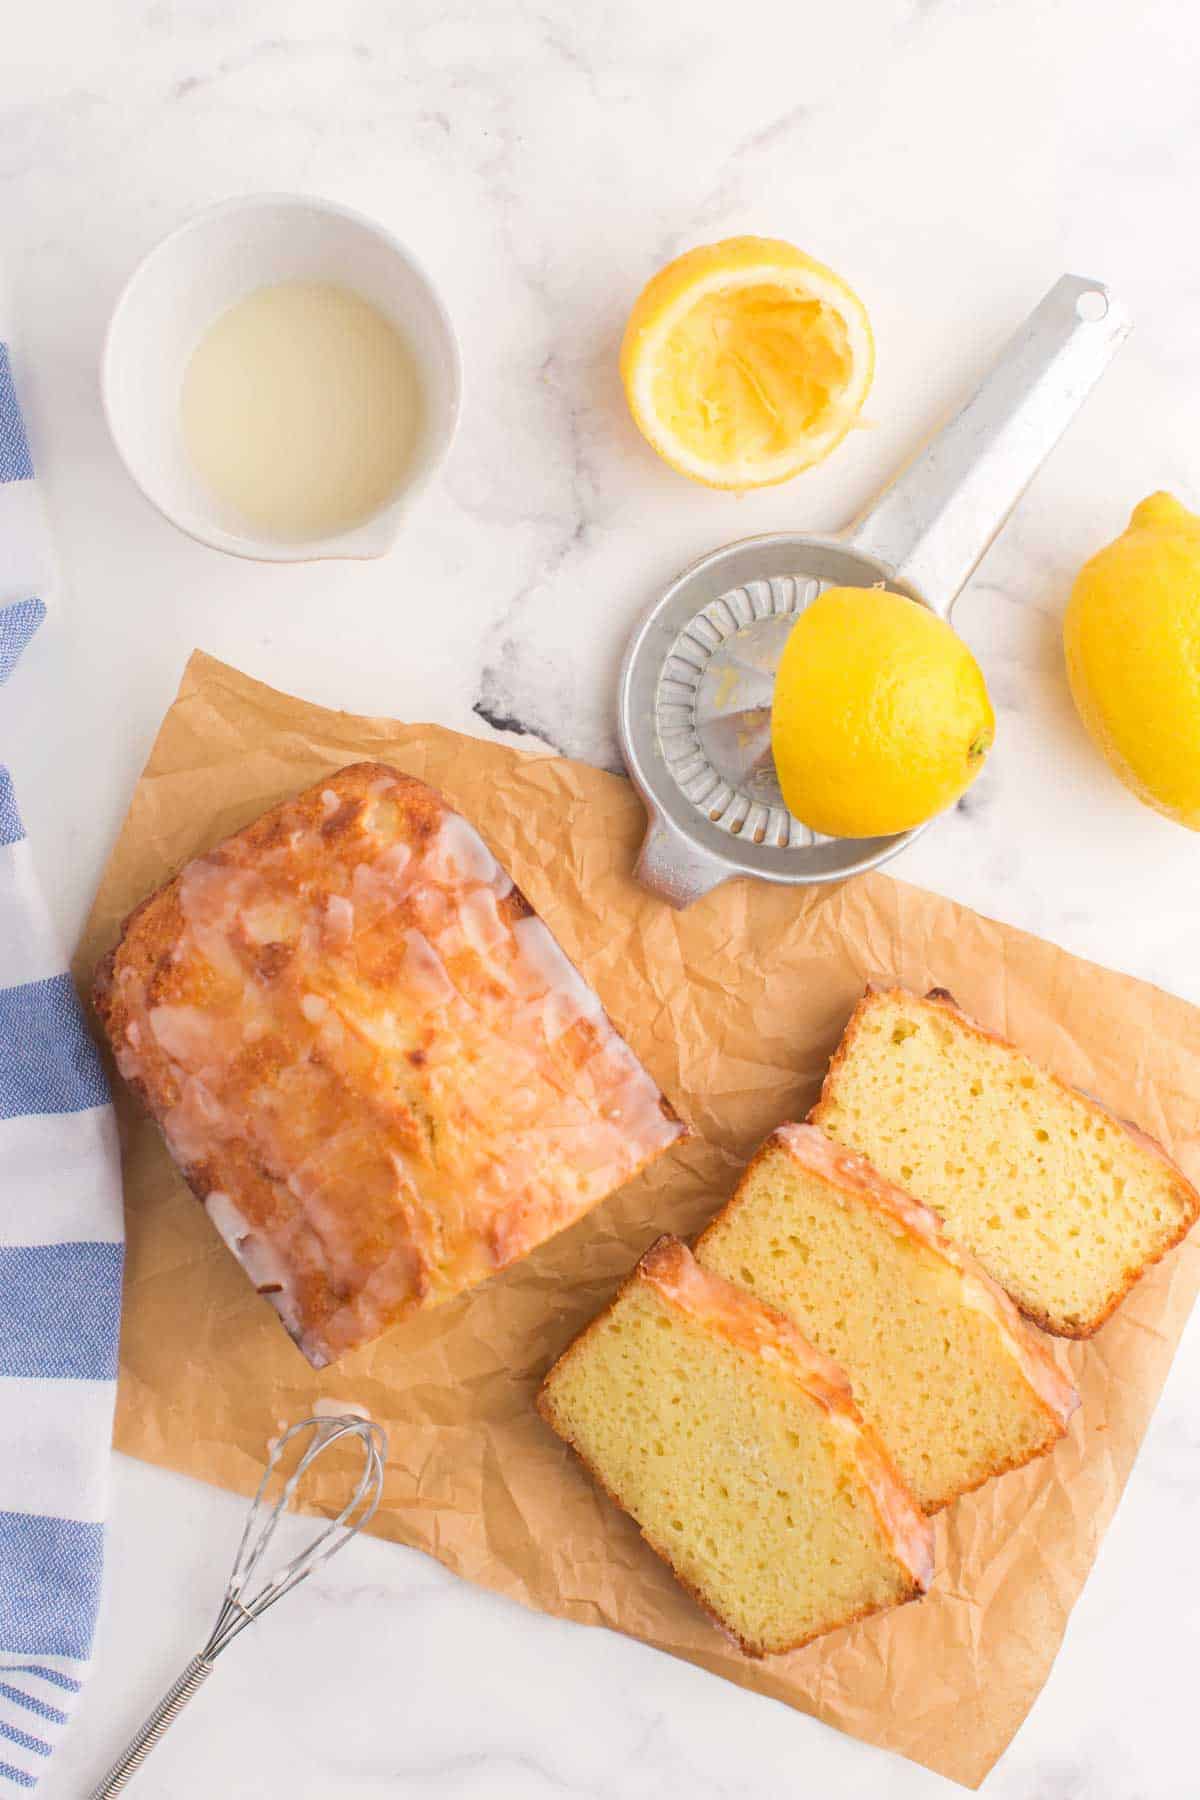 Half of the lemon pound cake on a piece of parchment alongside three slices and a whisk dripping with glaze